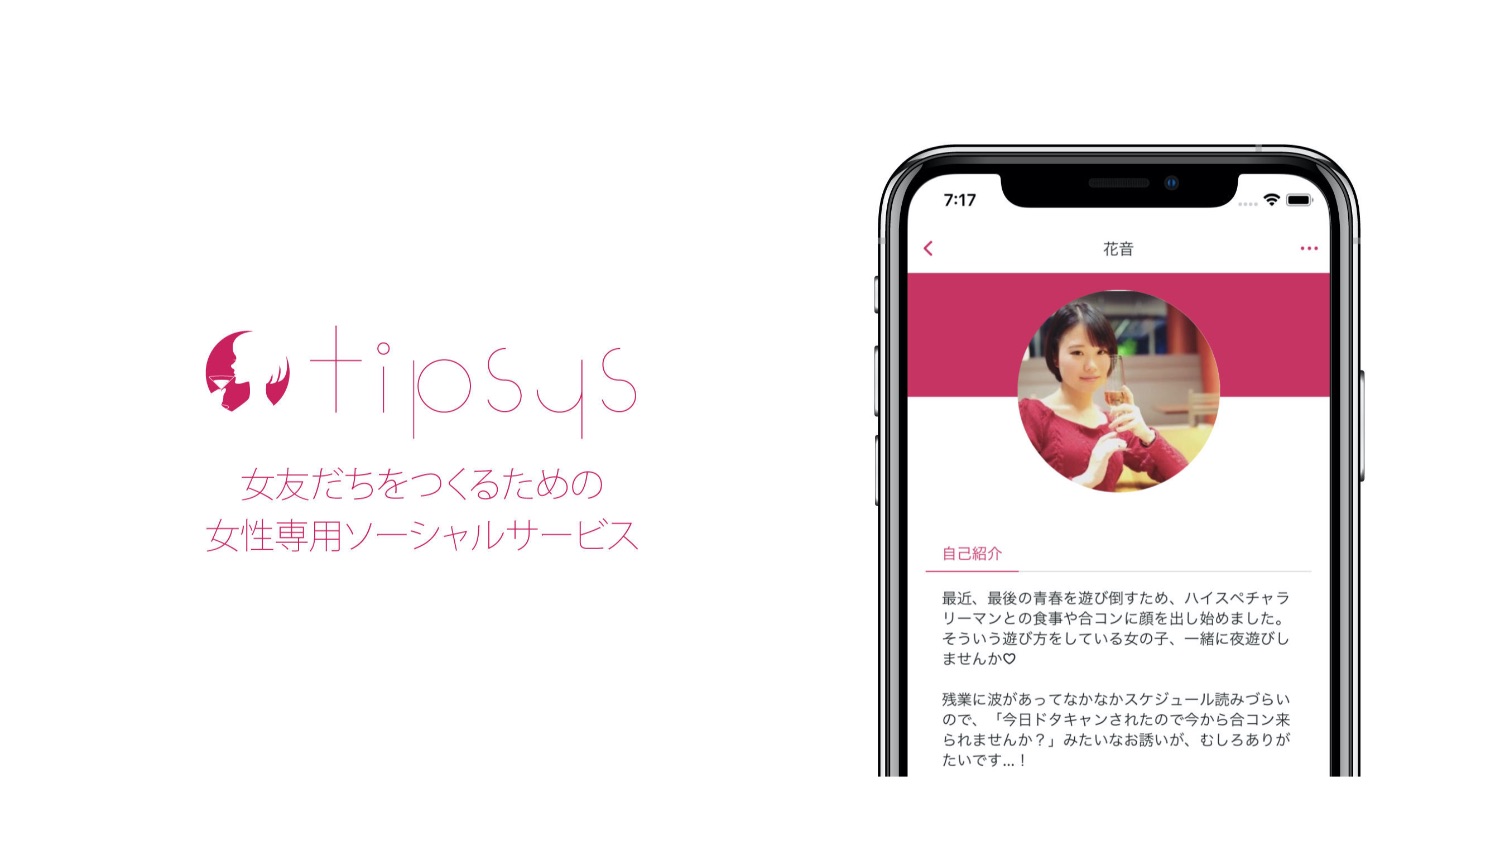 Anime AI Chat on the App Store